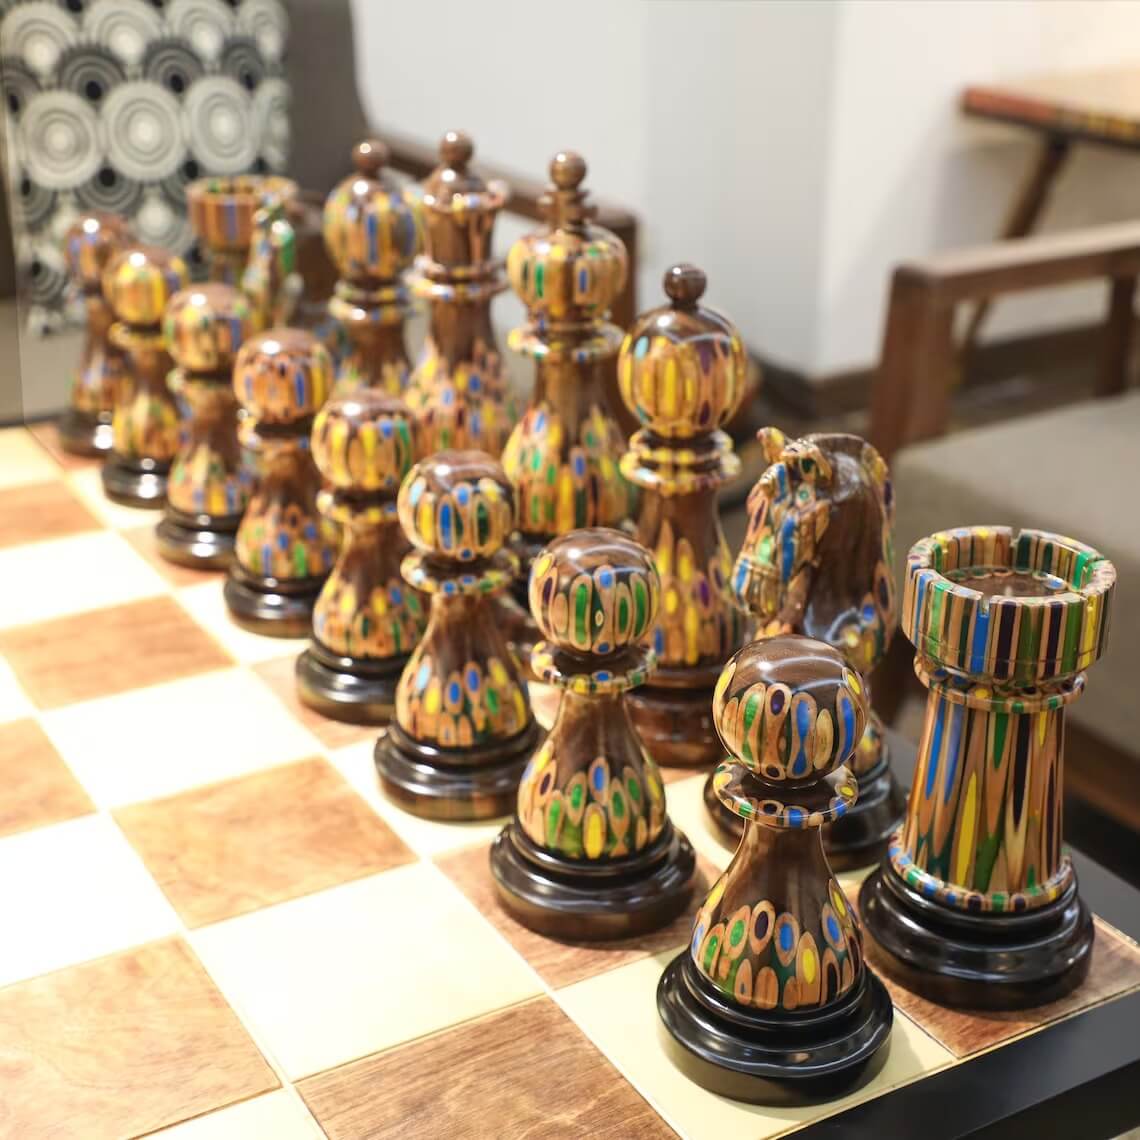 Full Set Giant Deluxe Chess Pieces with Board - High End Blended of Wood, Resin and Colored Pencils. 1